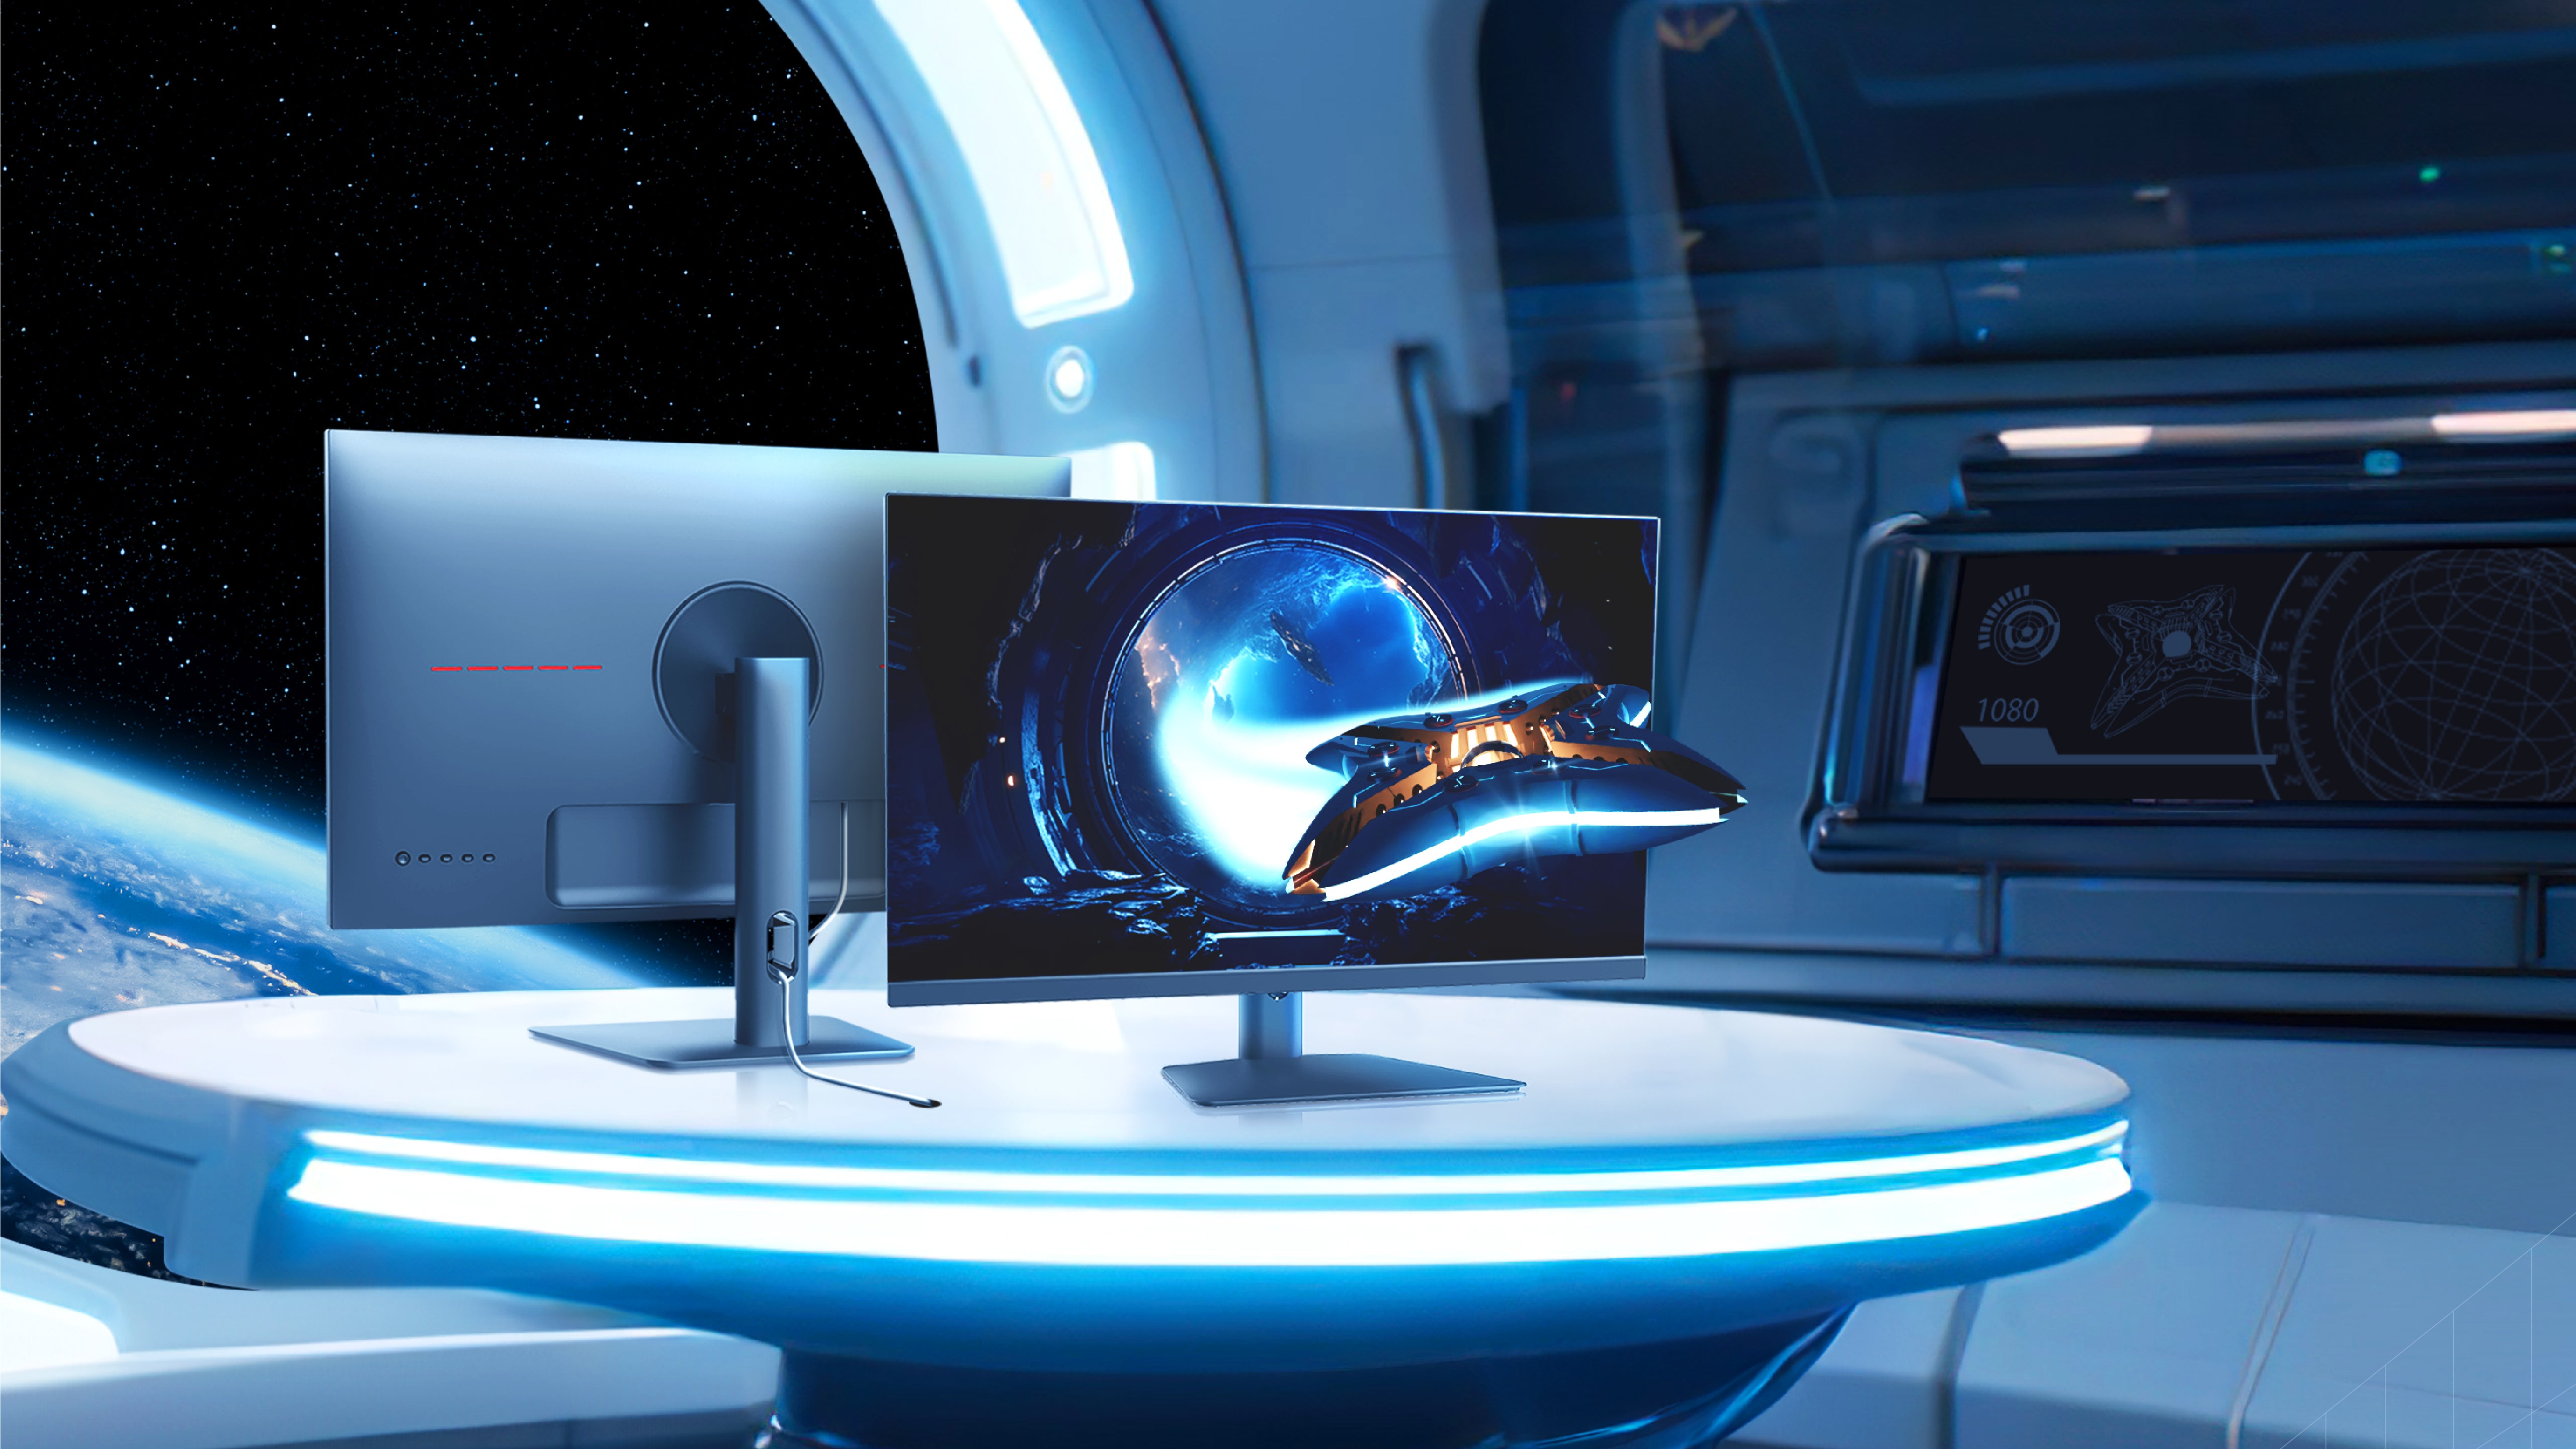 A 24 inch IPS Minifire X5G Gaming Monitor in a spaceship with blue light